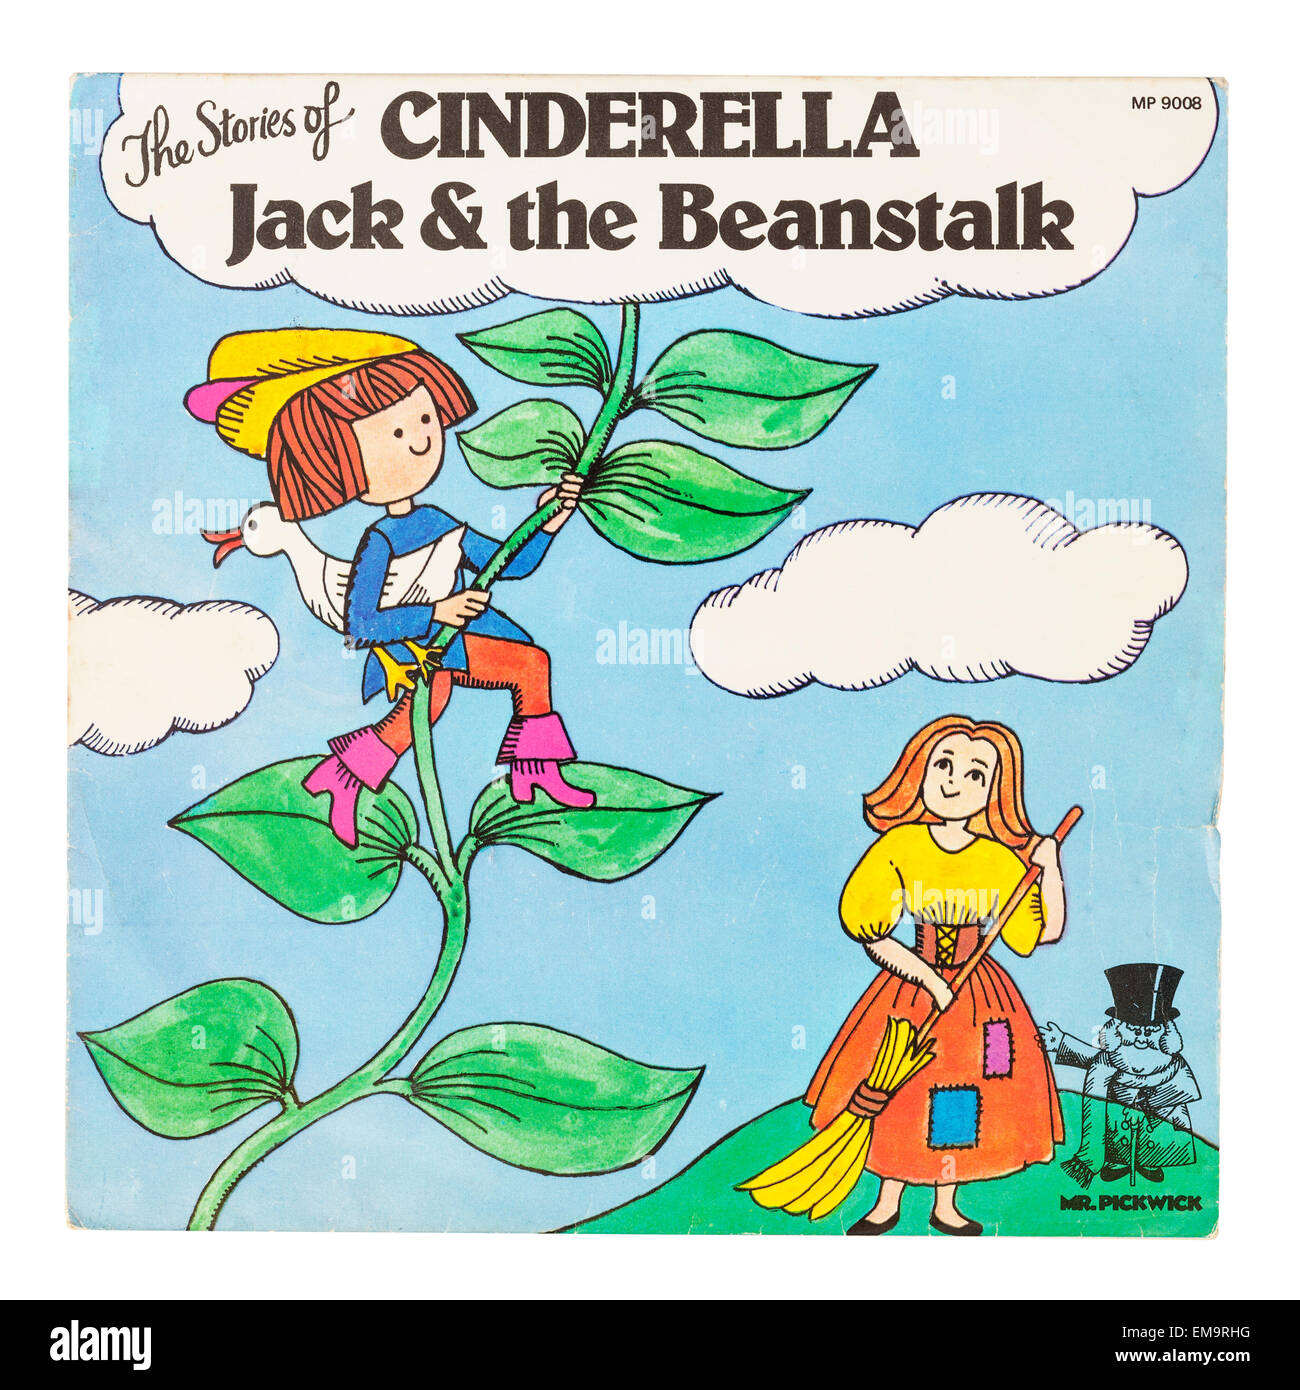 A Childrens Vinyl record called the stories of Cinderella and Jack & the Beanstalk on a white background Stock Photo